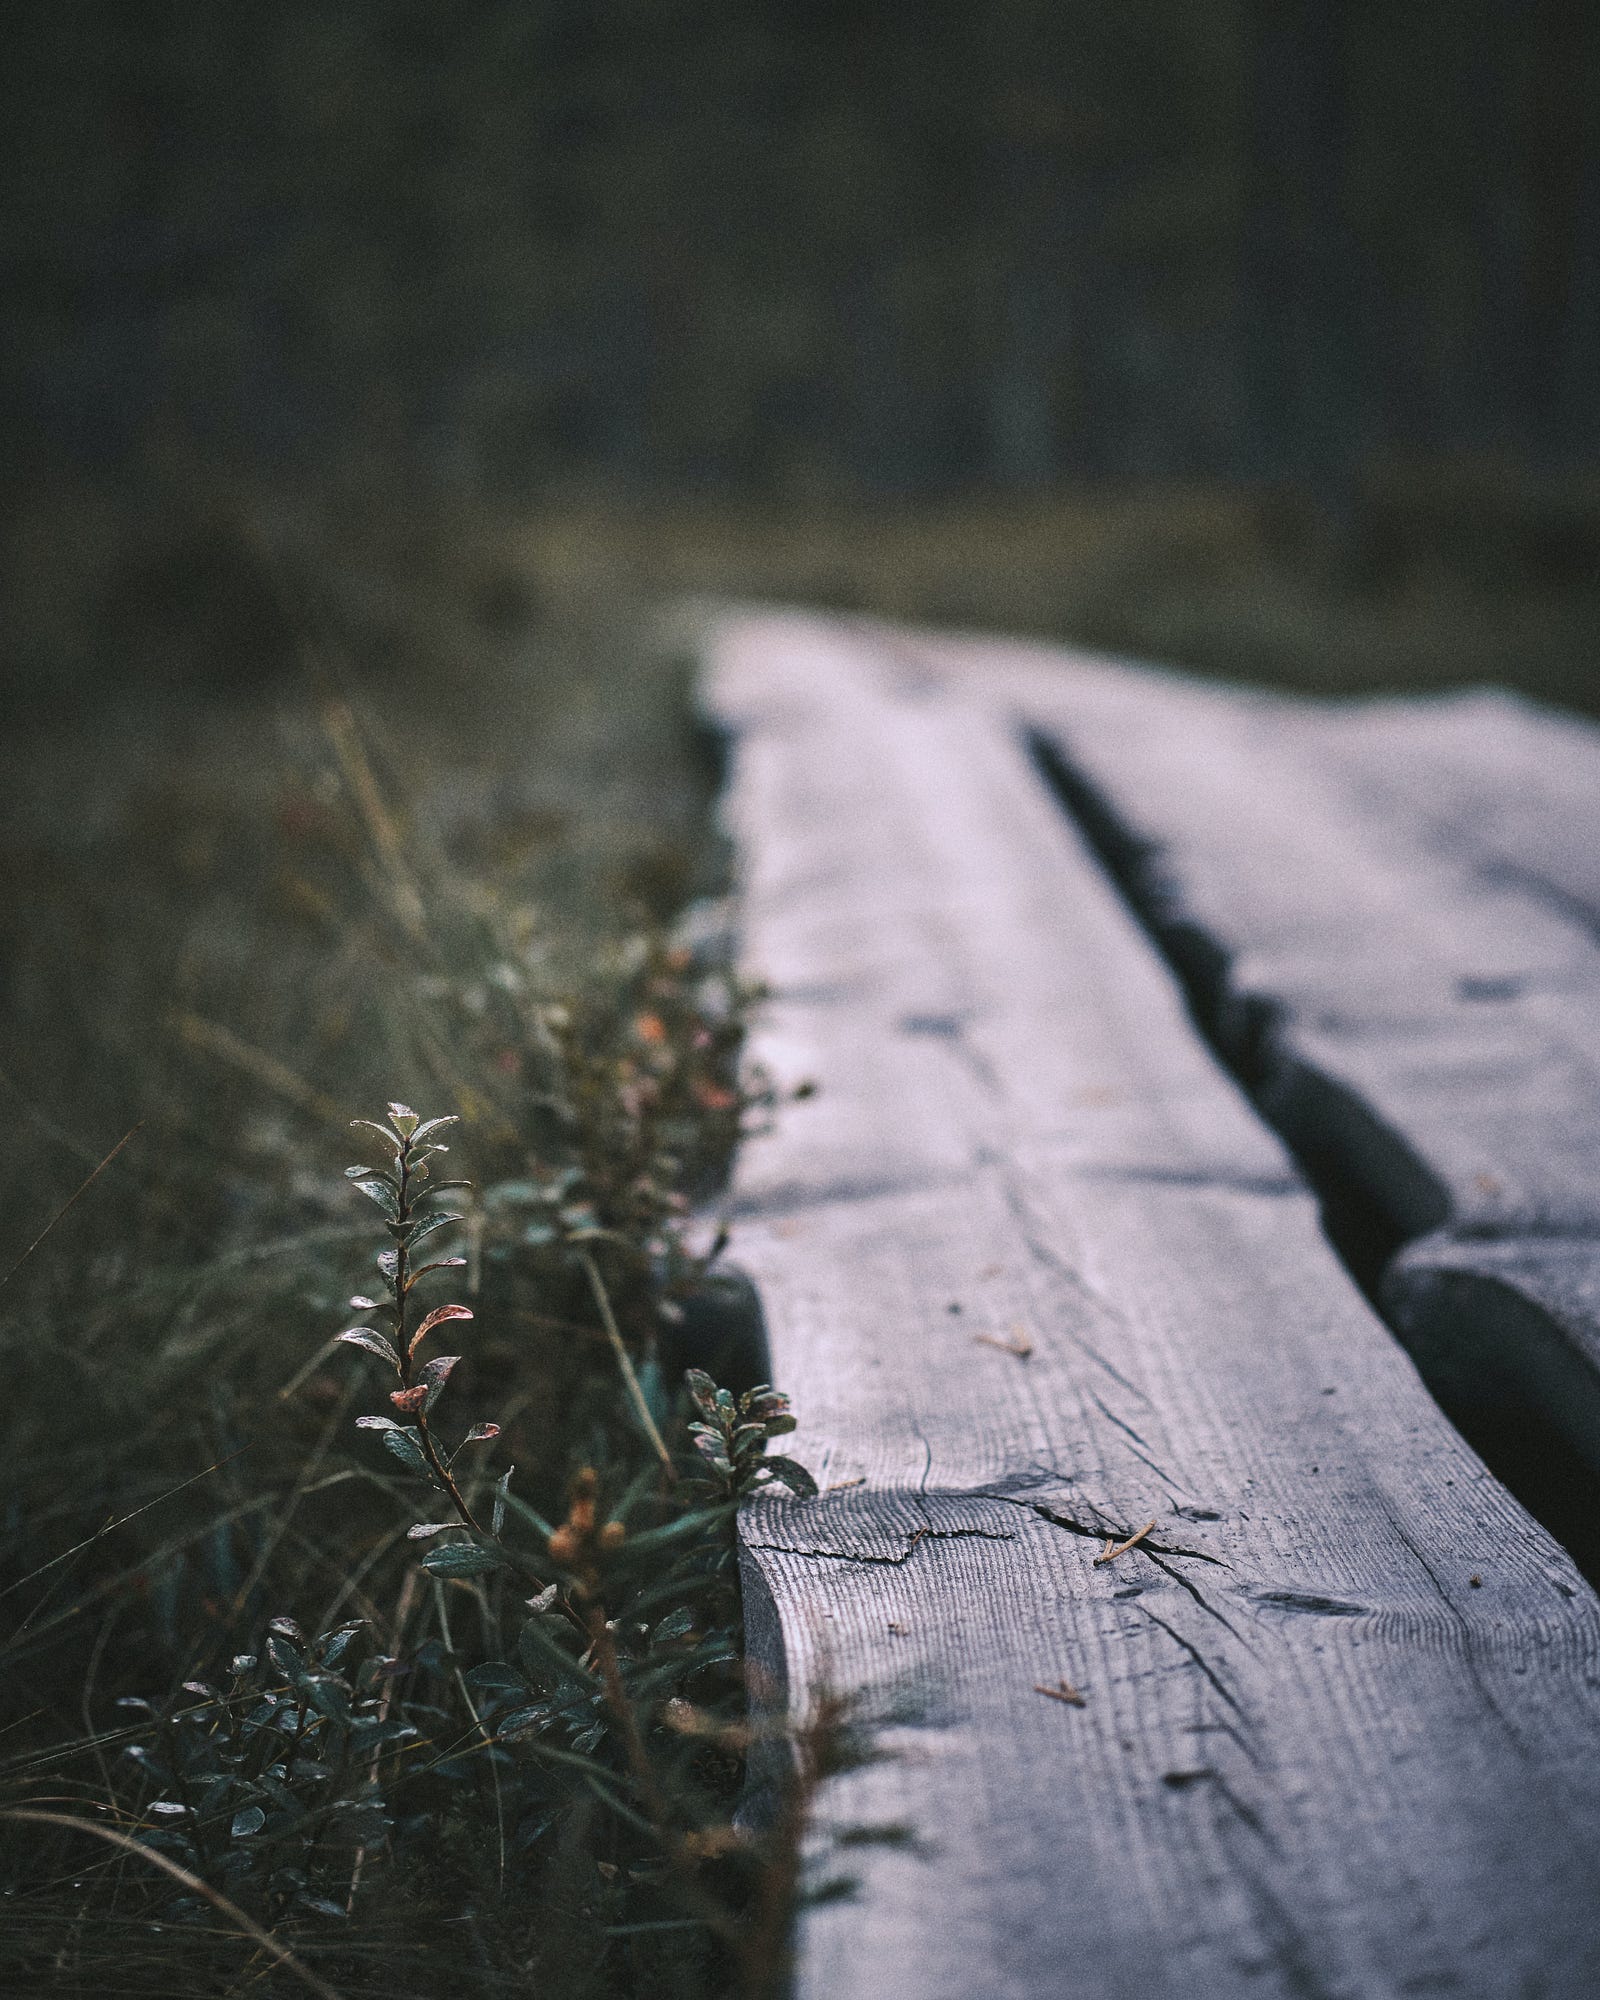 A cut piece of wood lies on grass. Reflecting on these Finnish lifestyle secrets, continuing my well-rounded and sustainable approach to health may be my best path to a longer, healthier life.